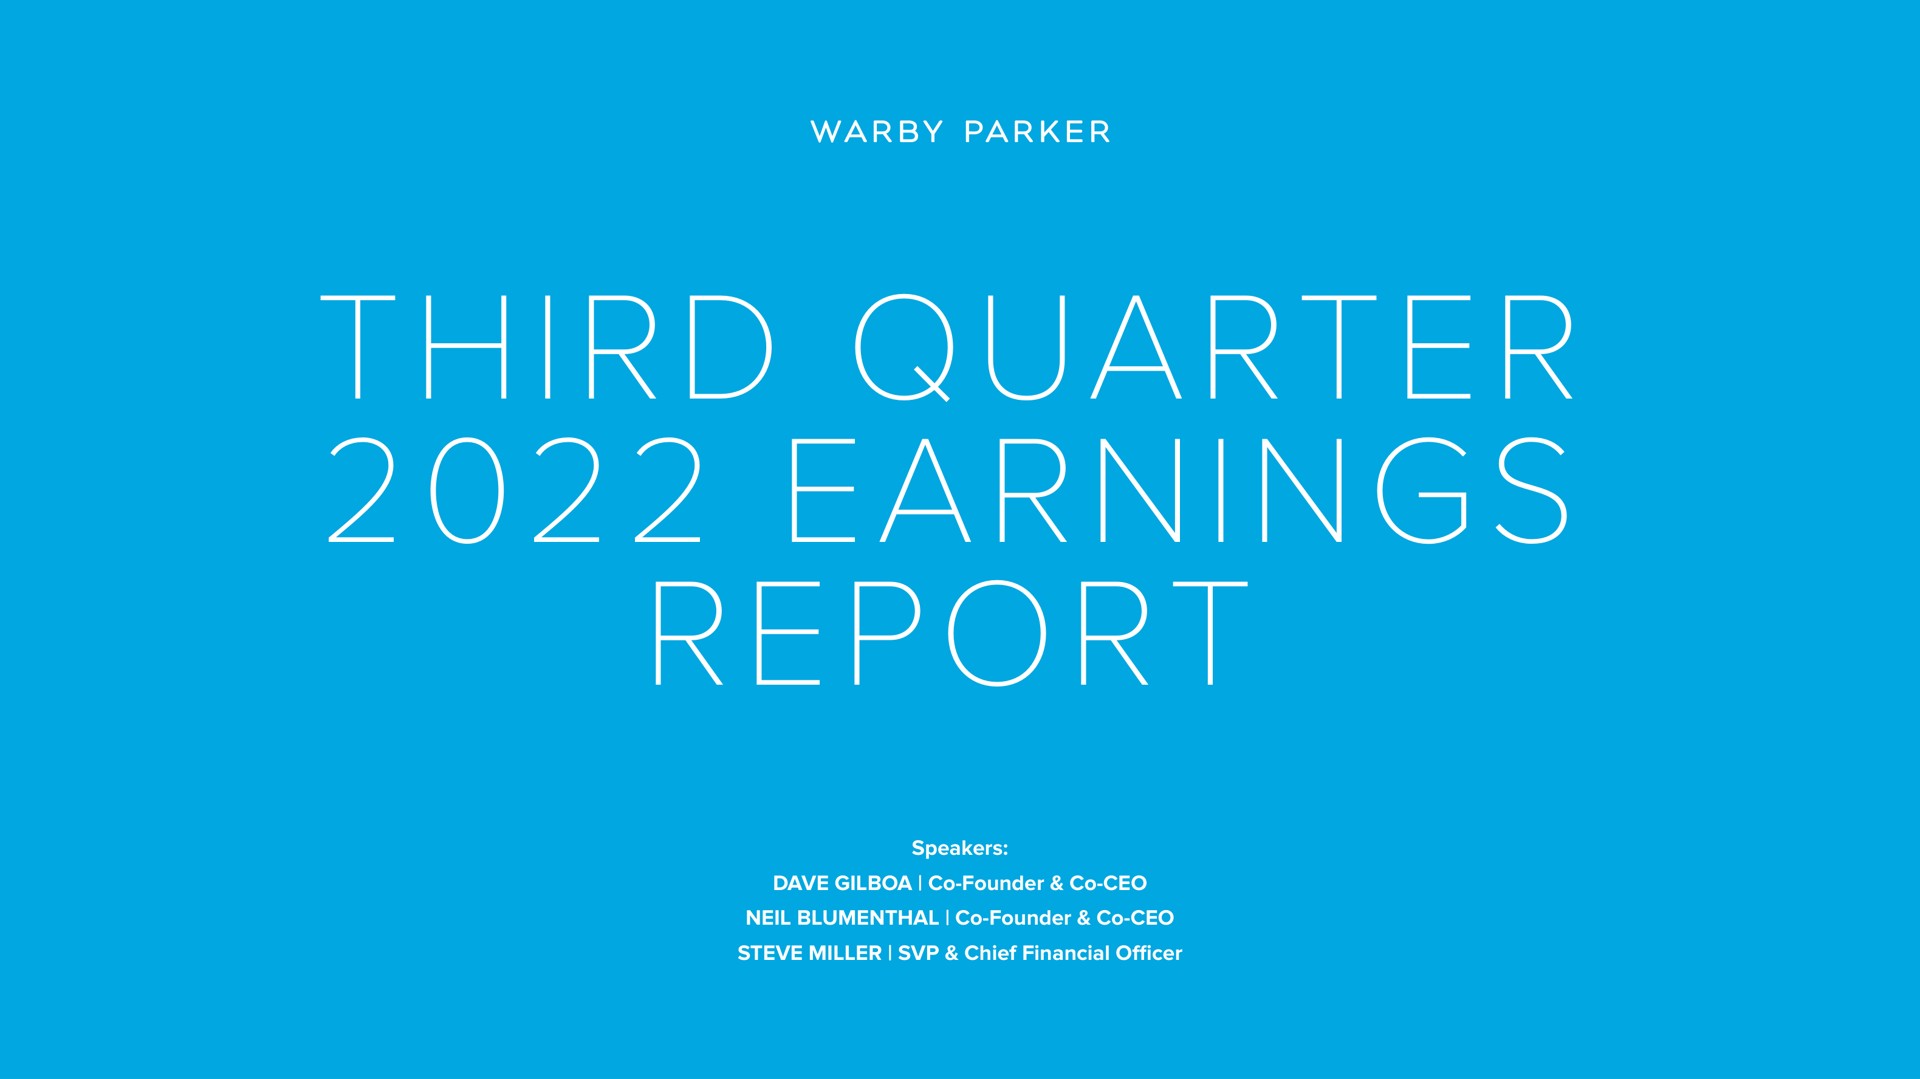 third quarter earnings report parker founder founder miller chief financial officer | Warby Parker